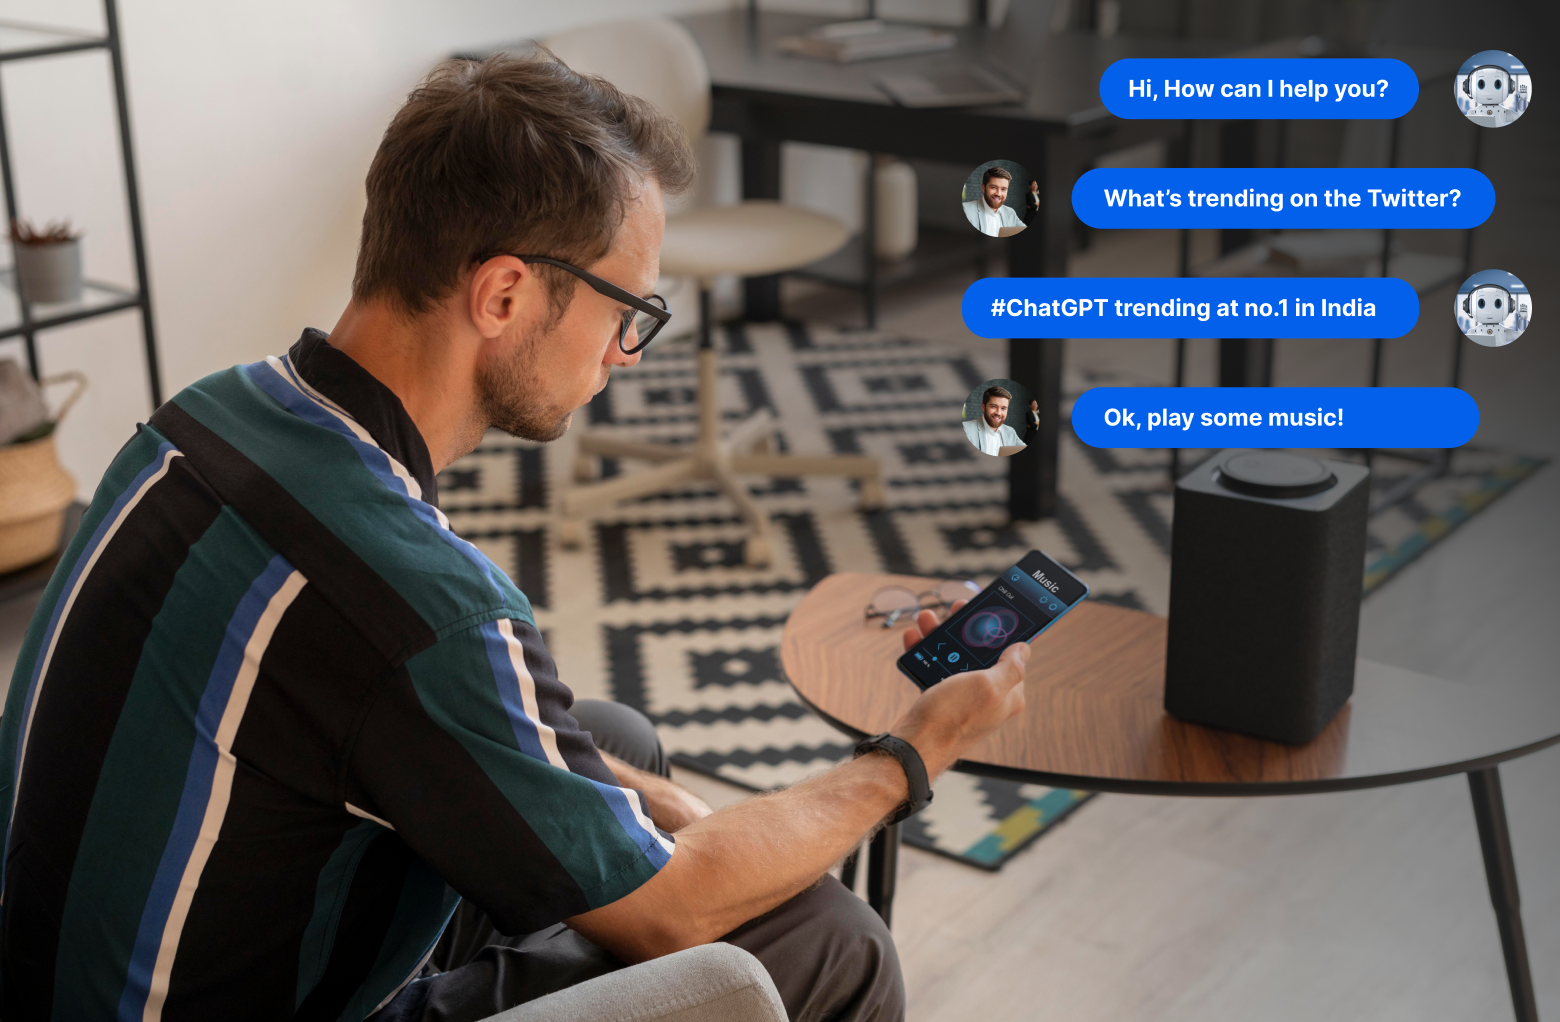 In this image, two men can be seen conversing with a personal assistant. Discover how speech recognition technology is used in personal assistant applications to provide users with a seamless experience